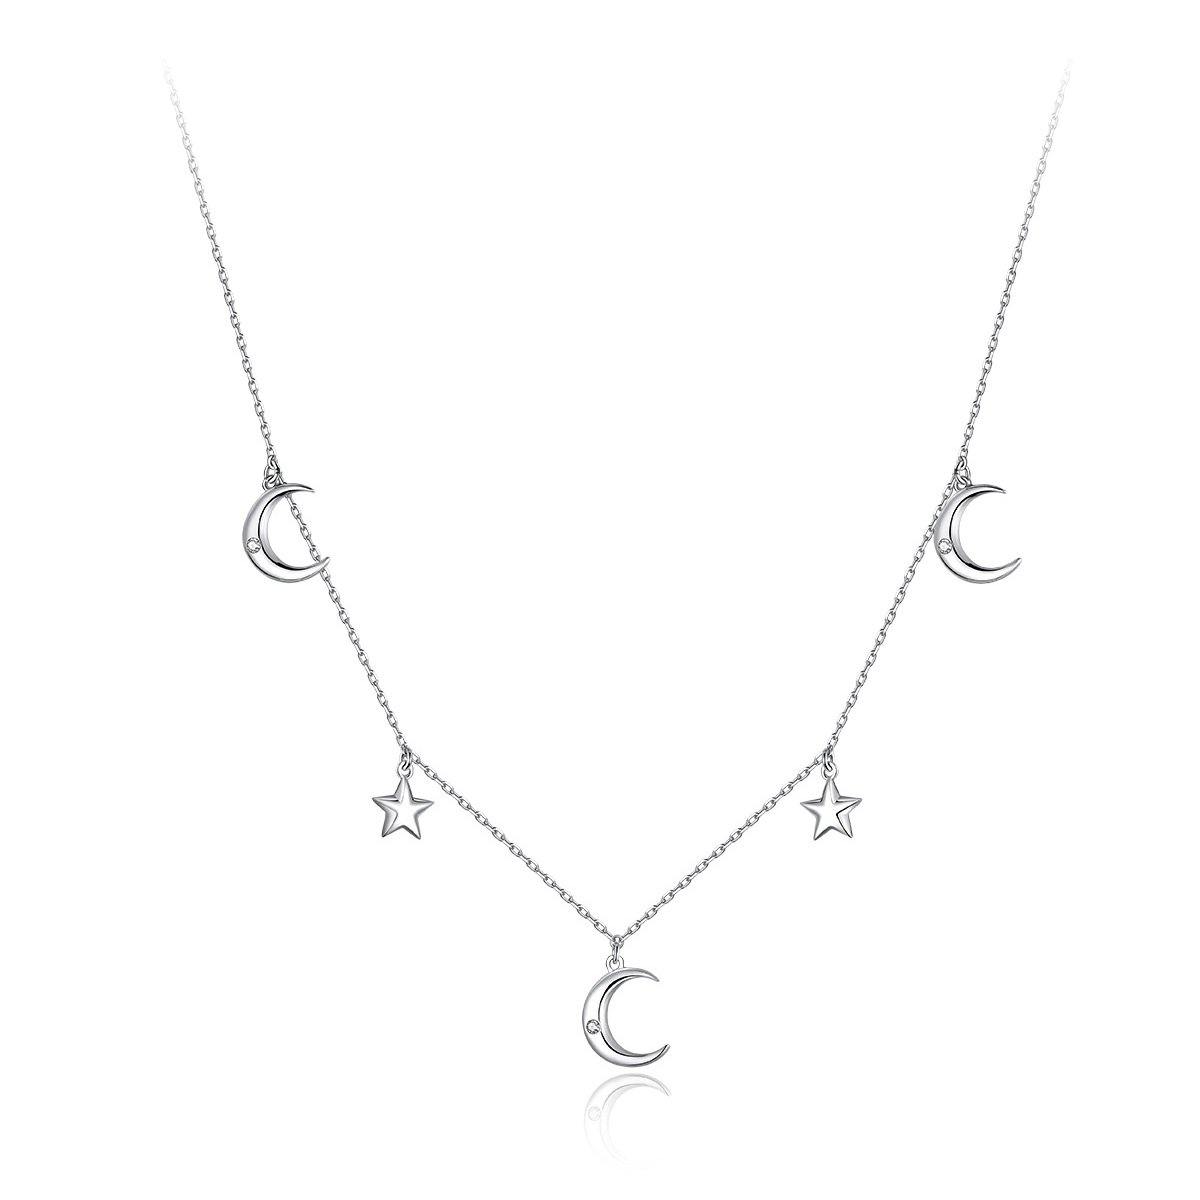 Moon and Star 925 Sterling Silver Necklace - Aisllin Jewelry